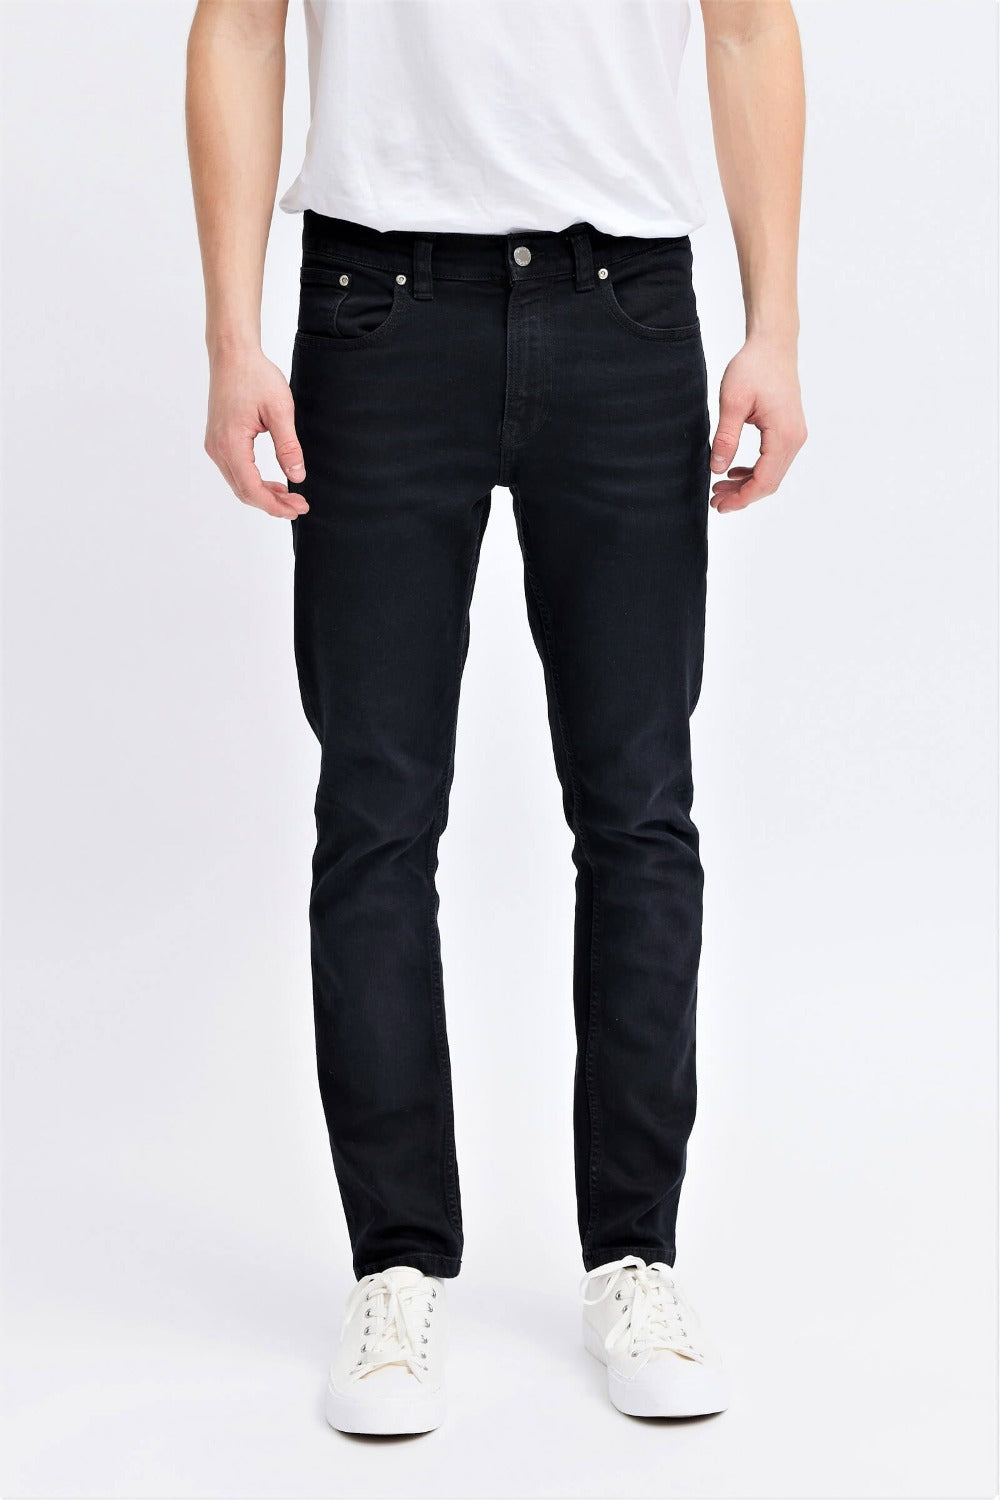  lease jeans for men